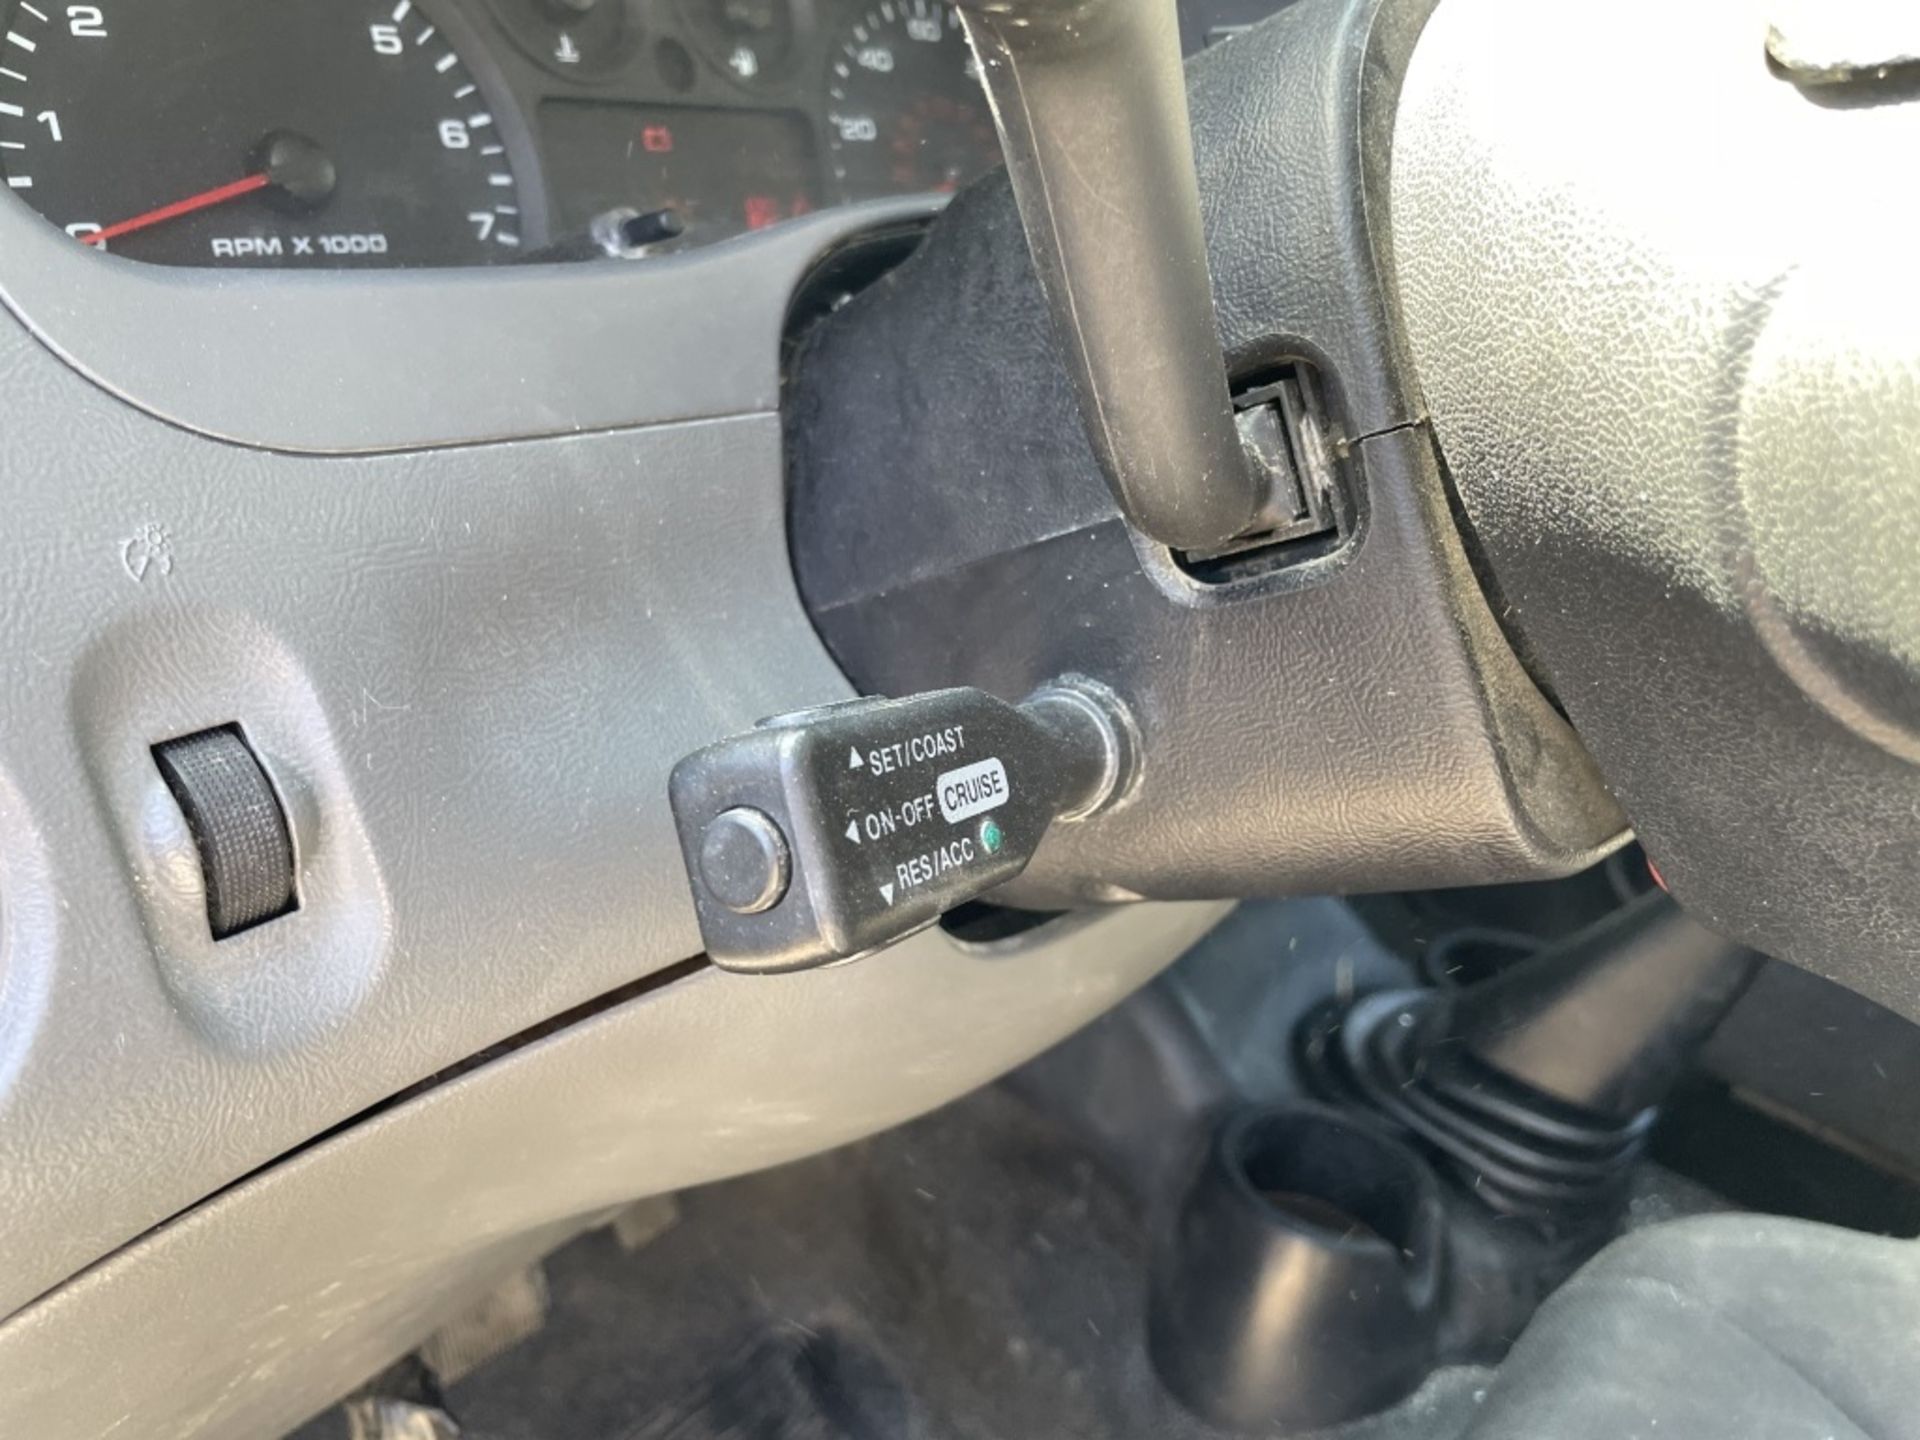 2007 Ford Ranger Extra Cab Pickup - Image 12 of 16